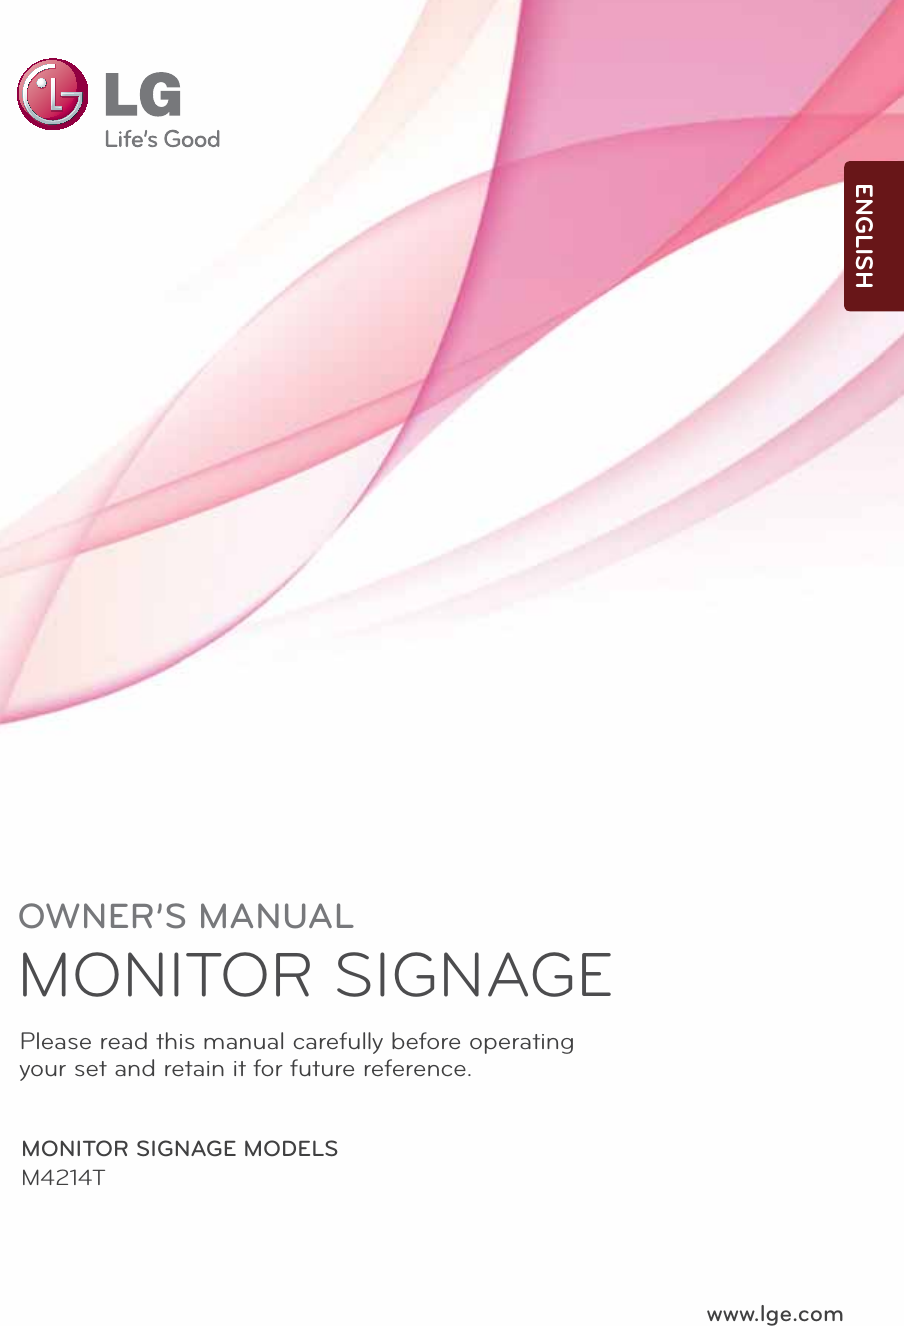 OWNER’S MANUALMONITOR SIGNAGE MONITOR SIGNAGE MODELSM4214Twww.lge.comPlease read this manual carefully before operatingyour set and retain it for future reference.ENGLISH